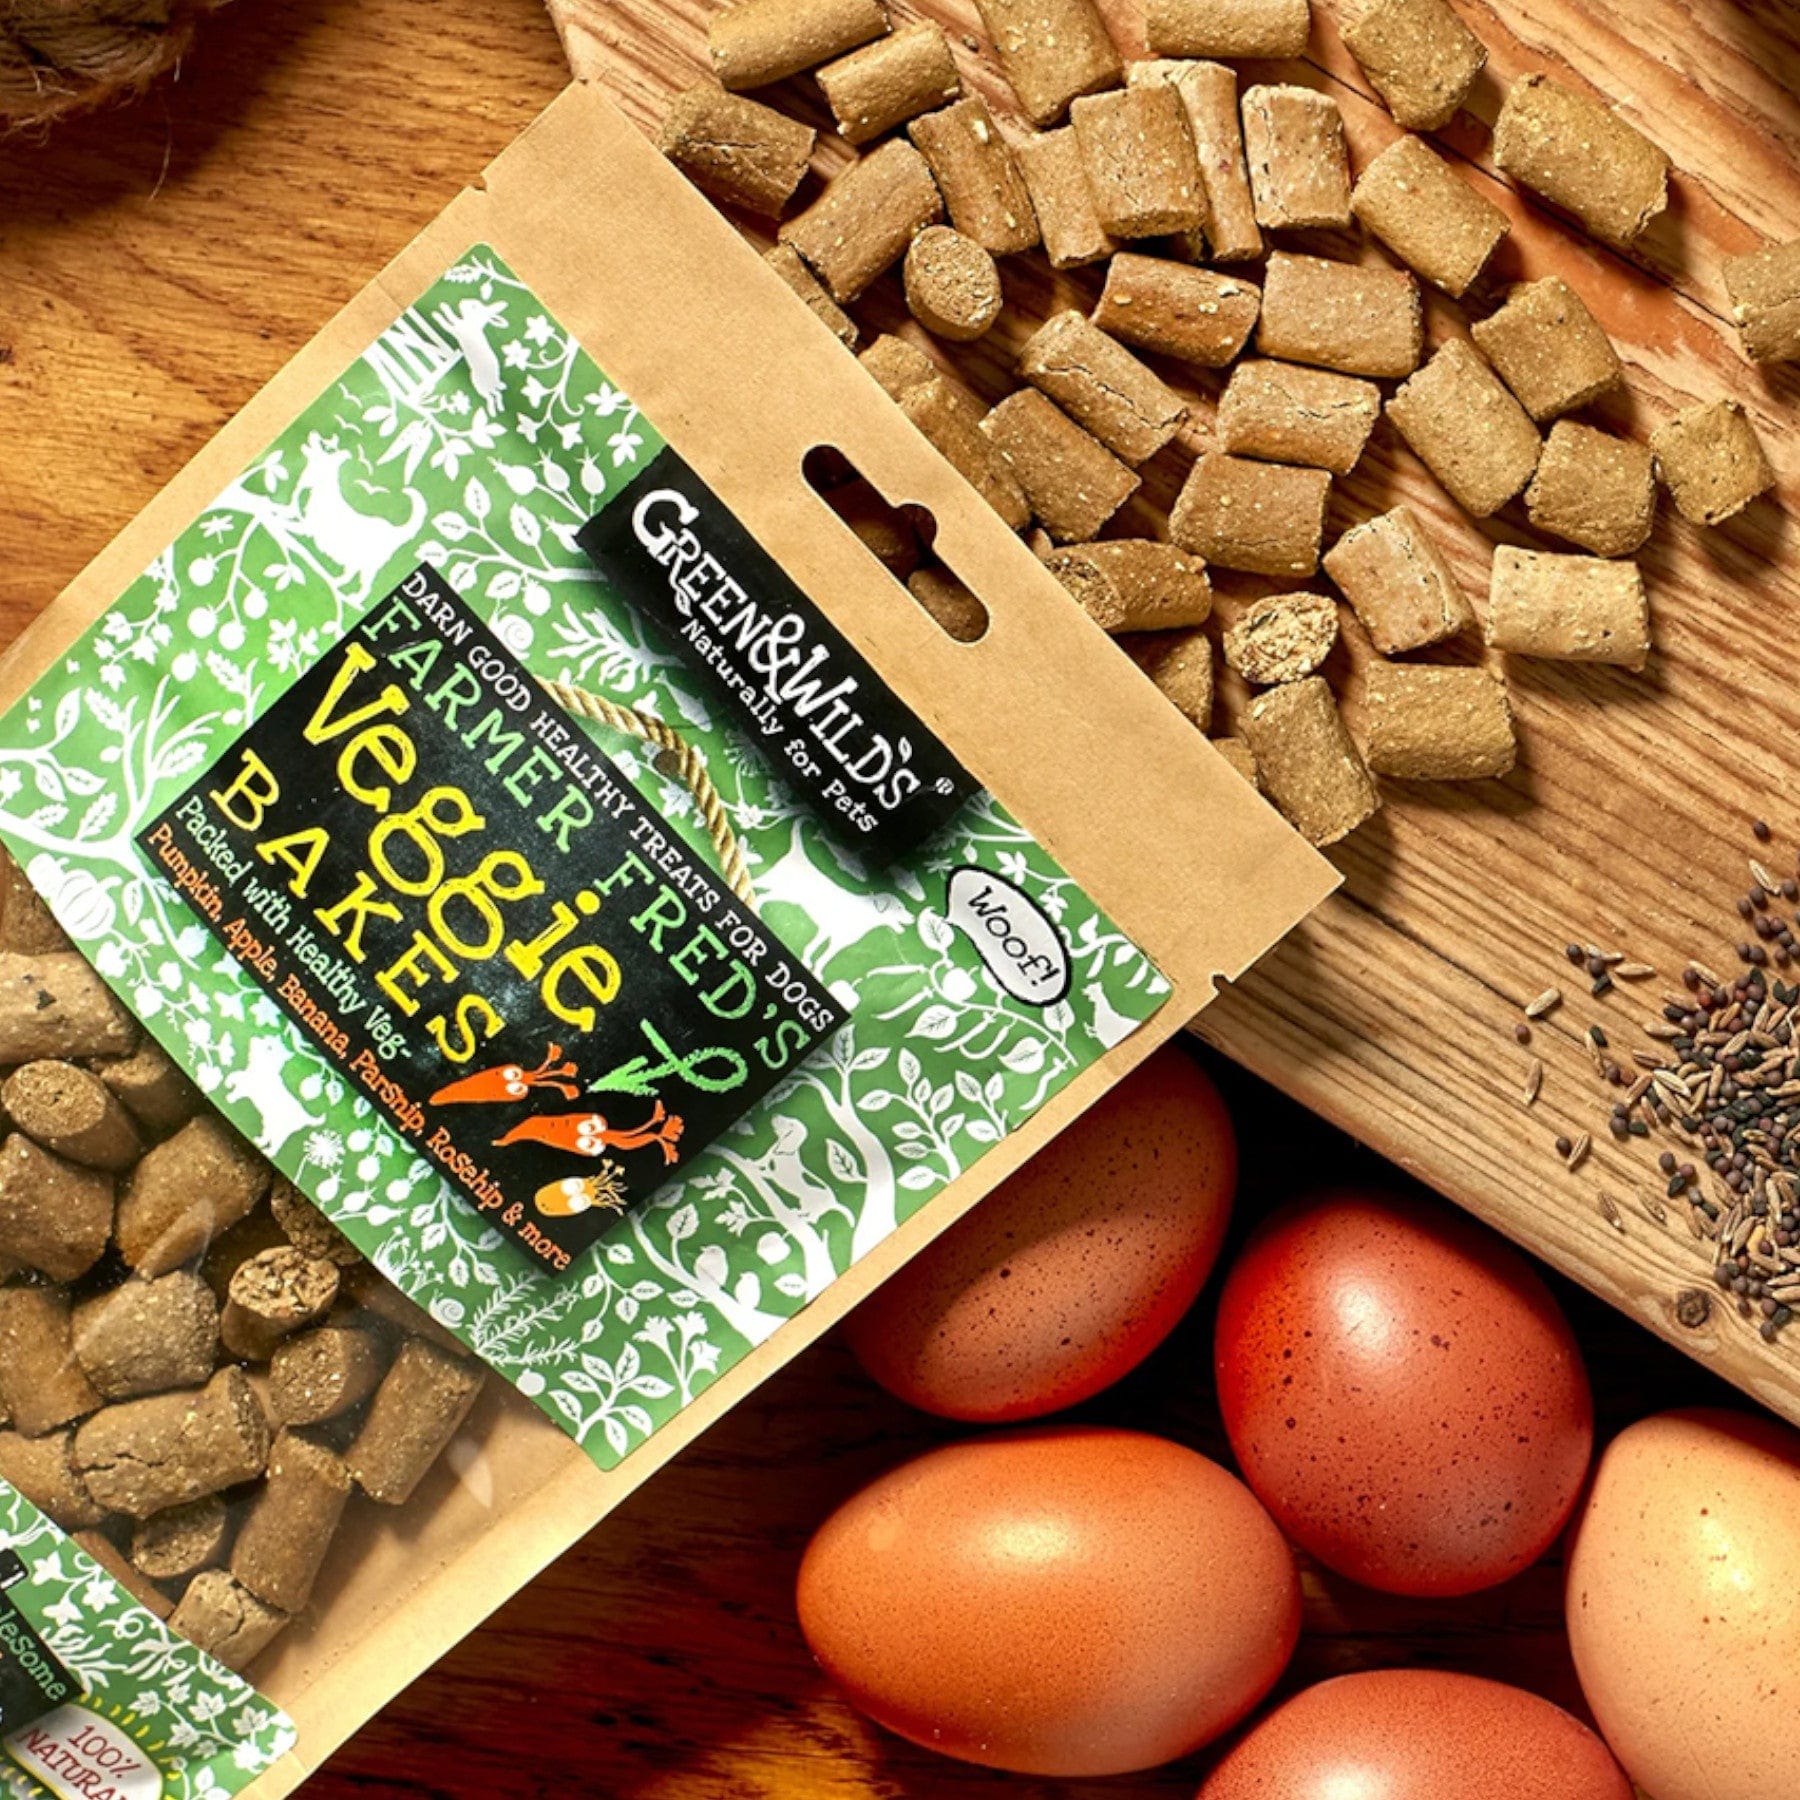 Green & Wilds Farmer Fred's Veggie Bakes dog treats packaging with loose treats scattered on wooden surface, eggs and sprinkle of seeds alongside.